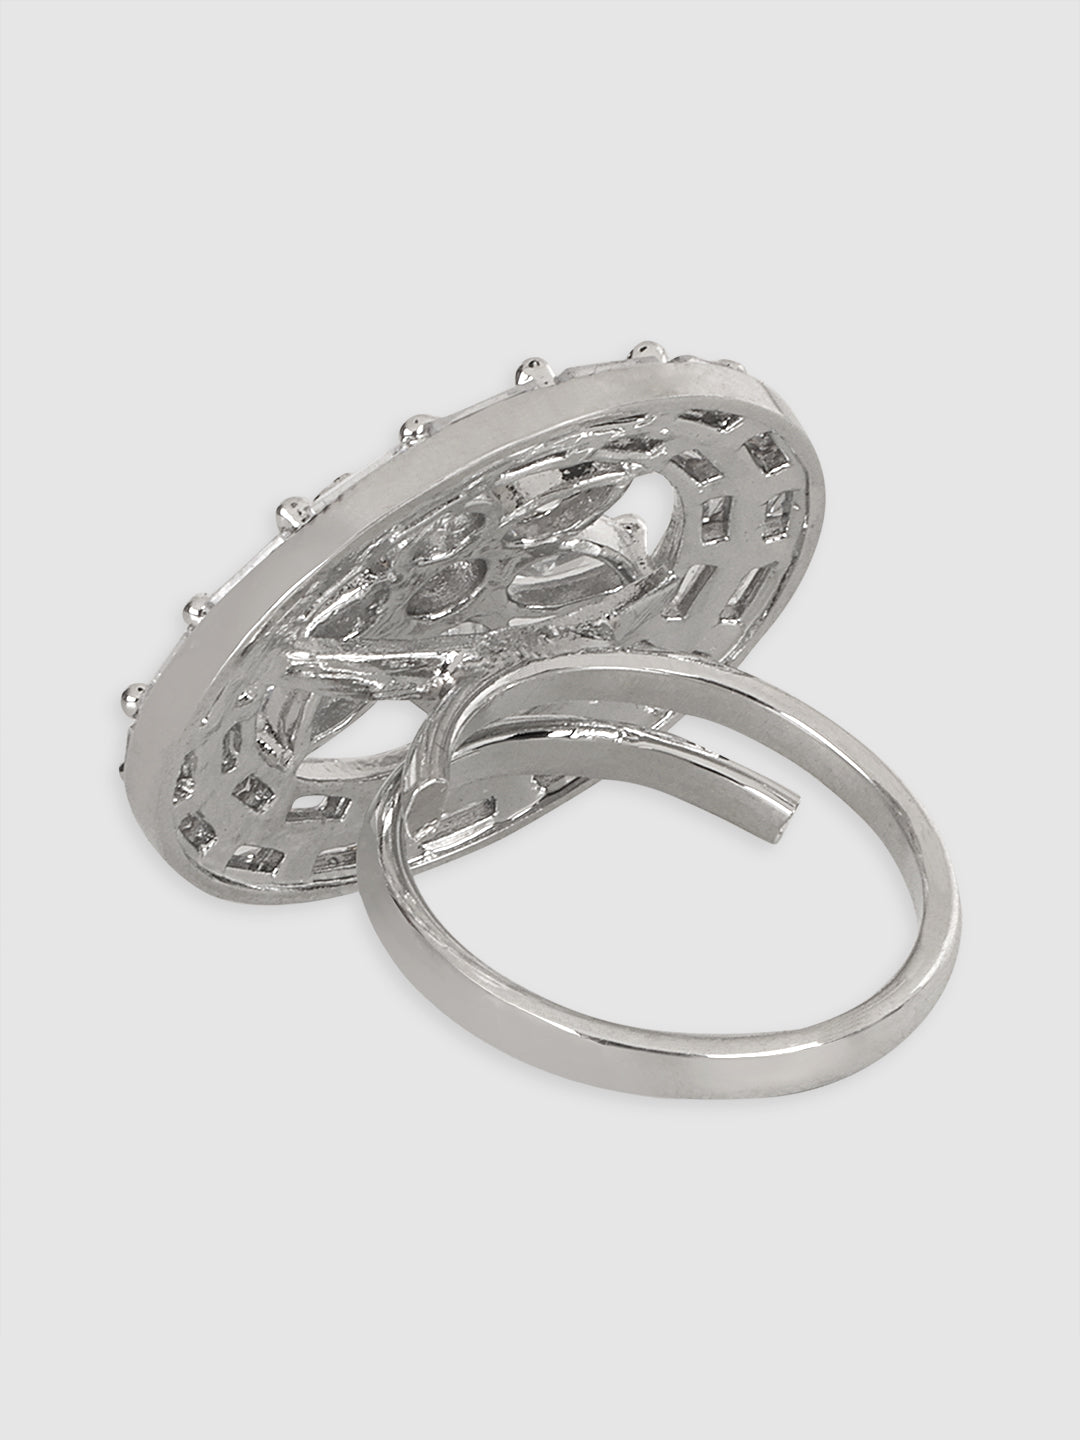 Rhodium-plated Silver-toned AD-Studded Circular Finger Ring